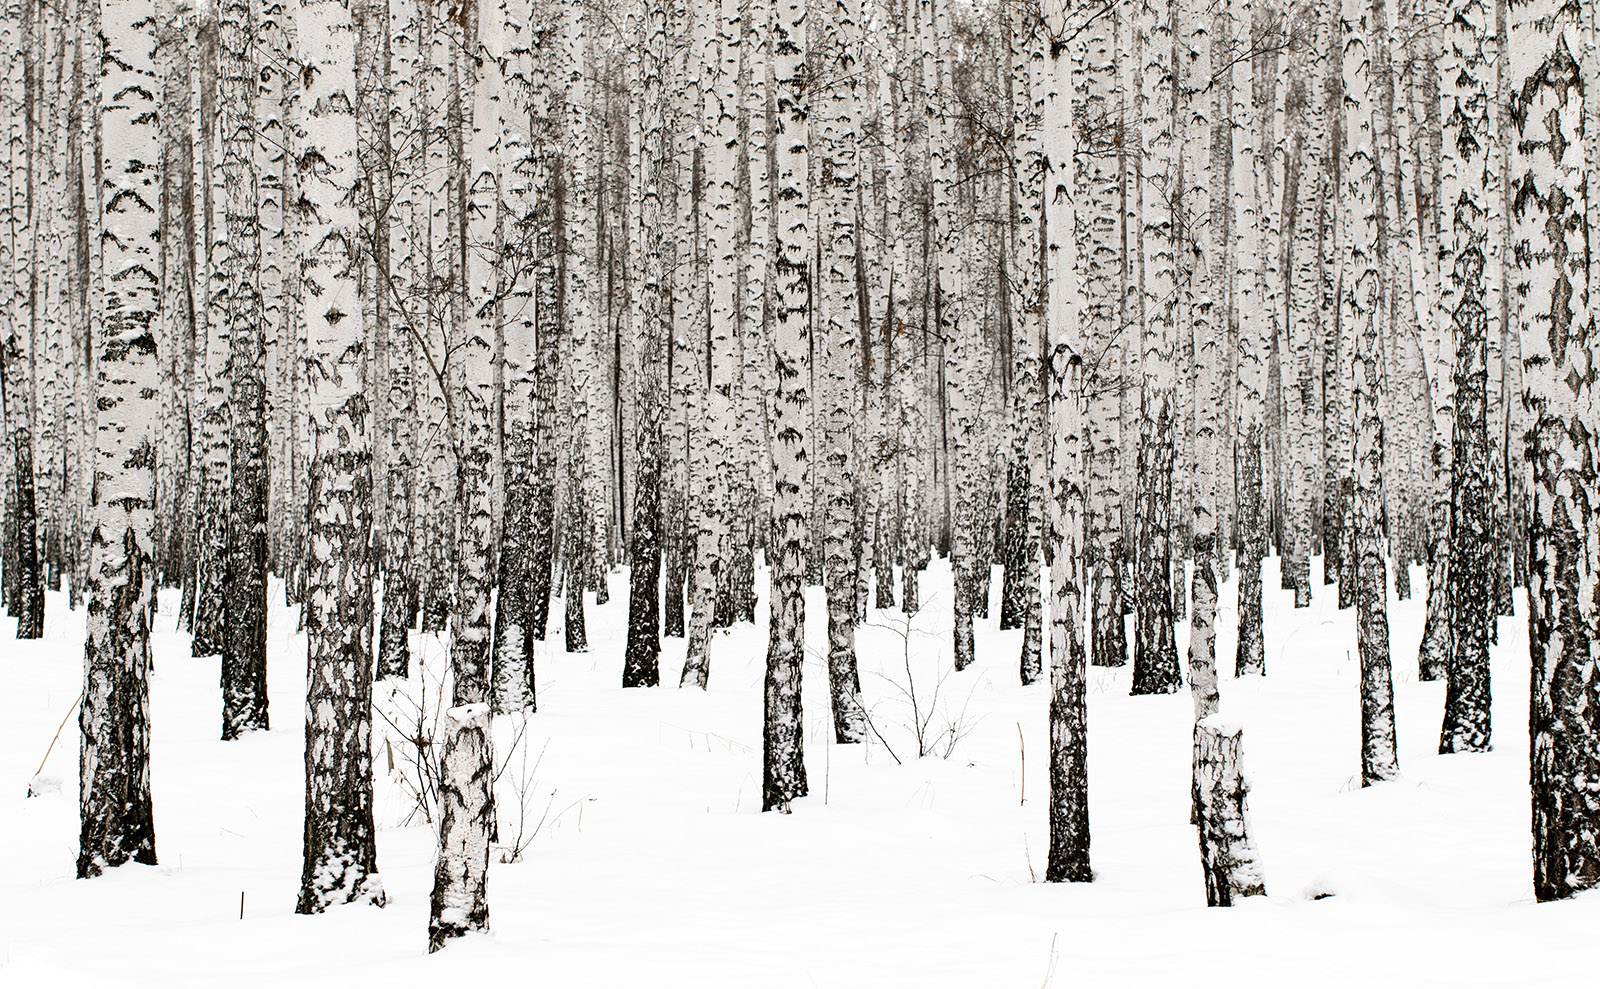 a forest of white birch trees in a snowy landscape